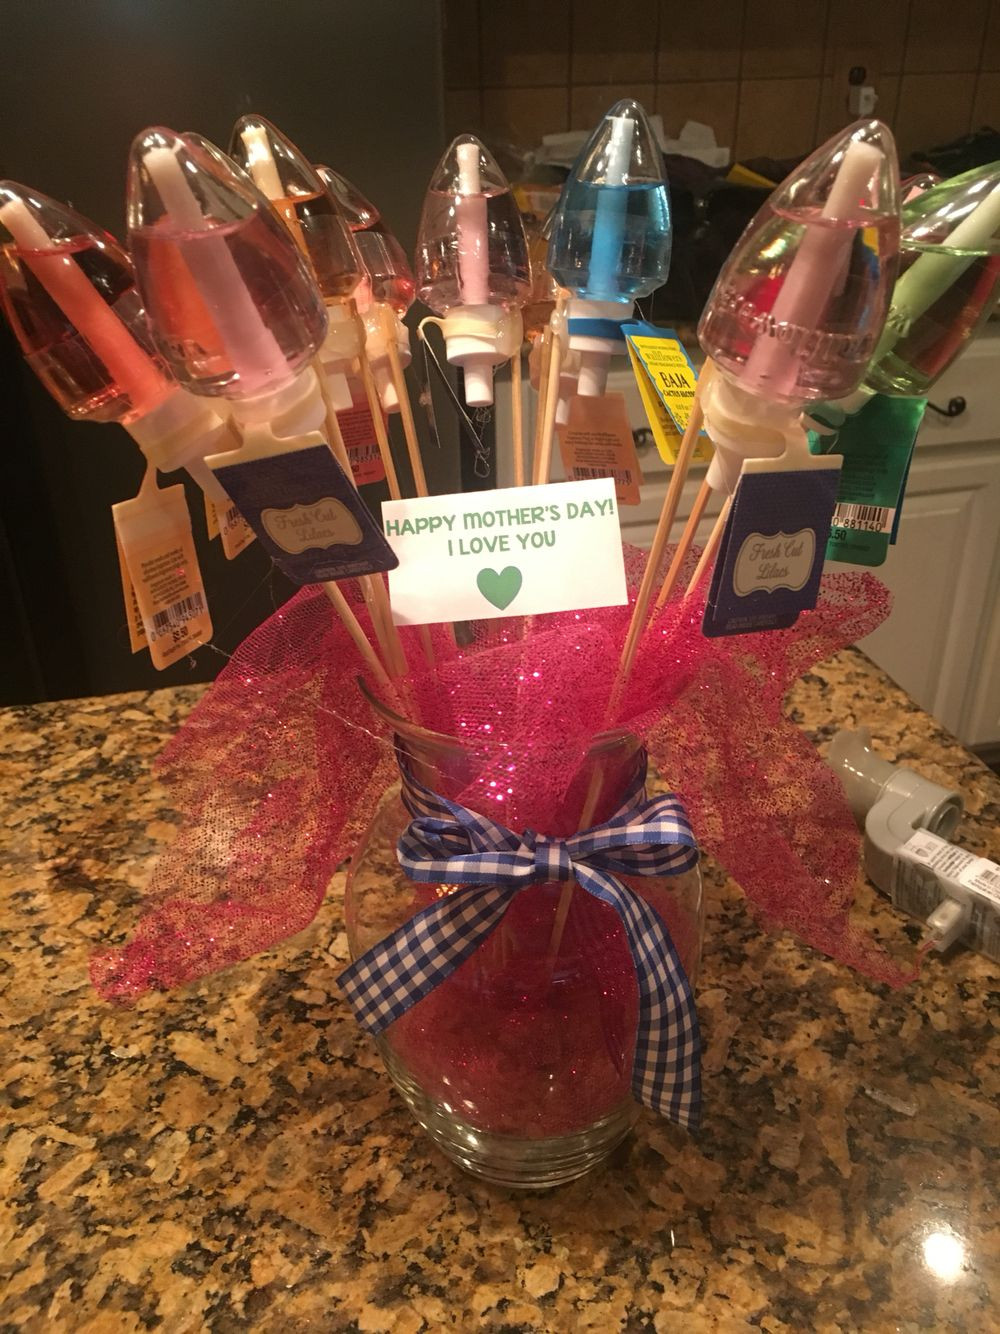 Bath And Body Works Gift Basket Ideas
 A bouquet of Bath and Body Works Wallflowers for Mother s